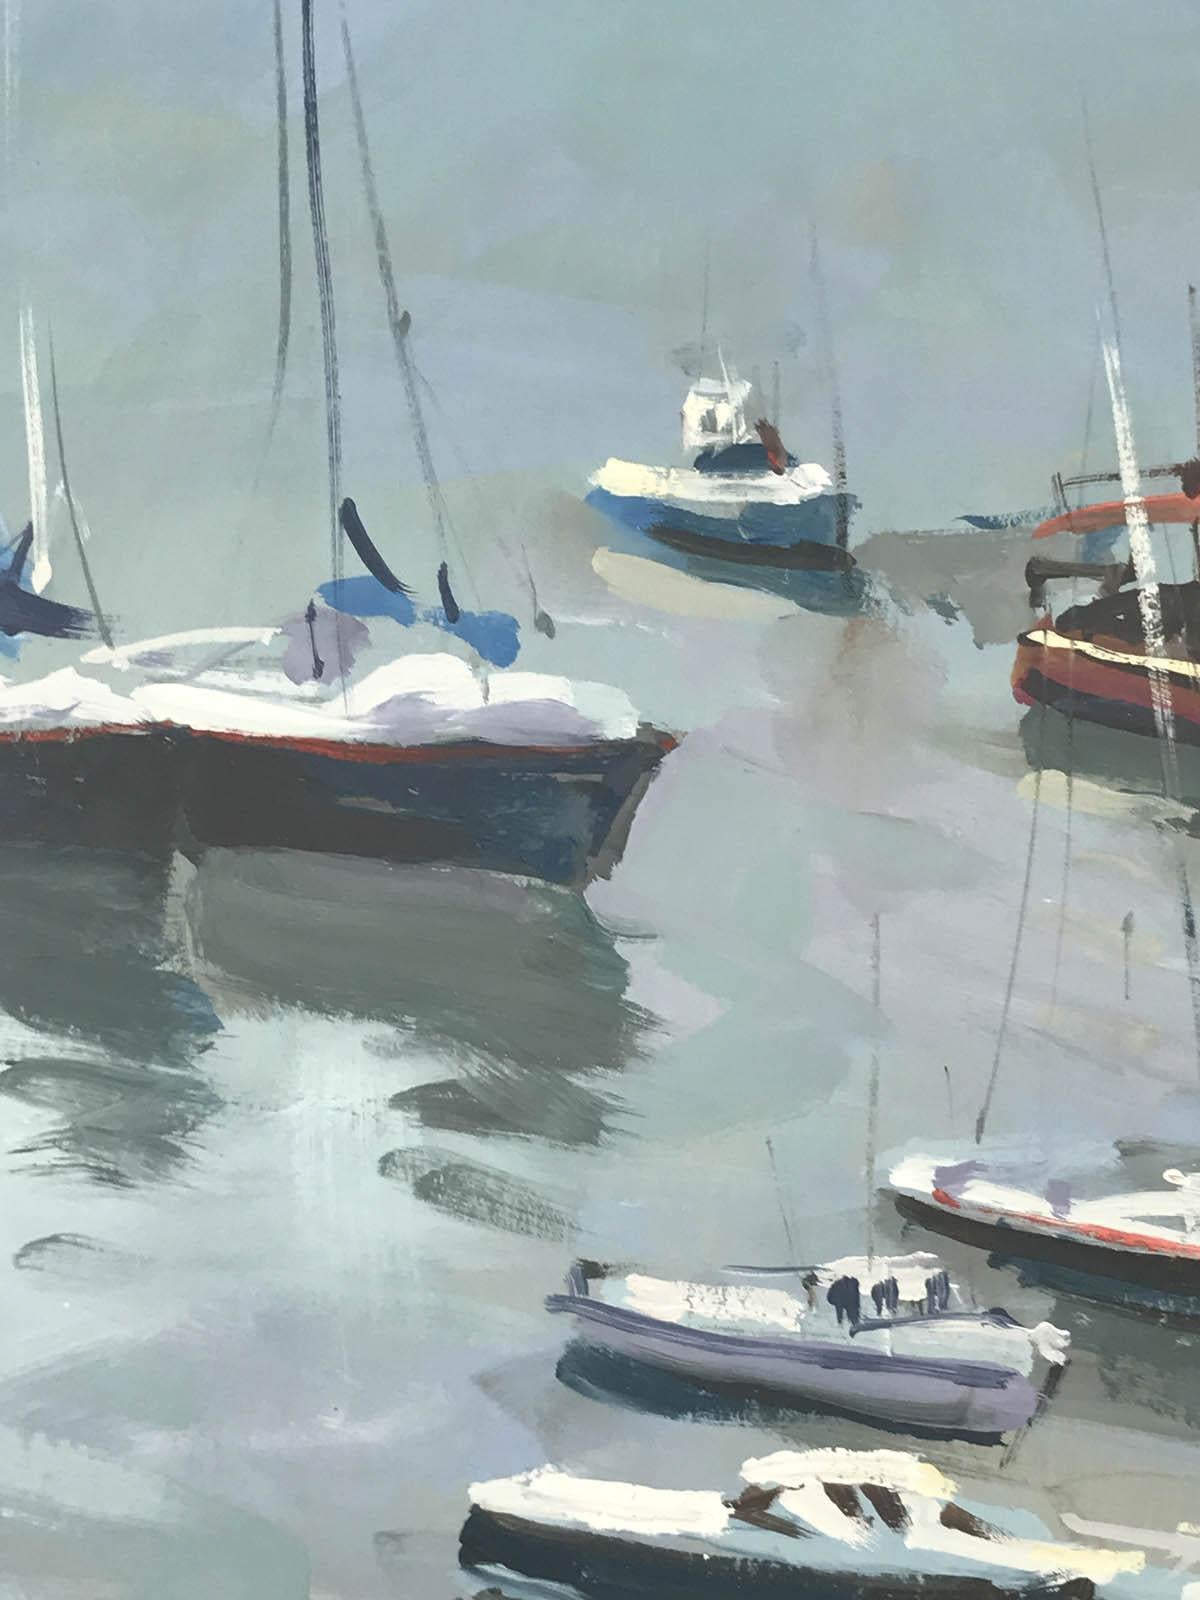 Trevor Waugh
Cornish Harbour Lights
Original Unframed Oil Painting
Oil Paint on Card
Size: H 40.7cm (16 inches) x W 50.8cm (20 inches)
Please note that in situ images are purely an indication of how a piece may look.

Cornish Harbour Light is an